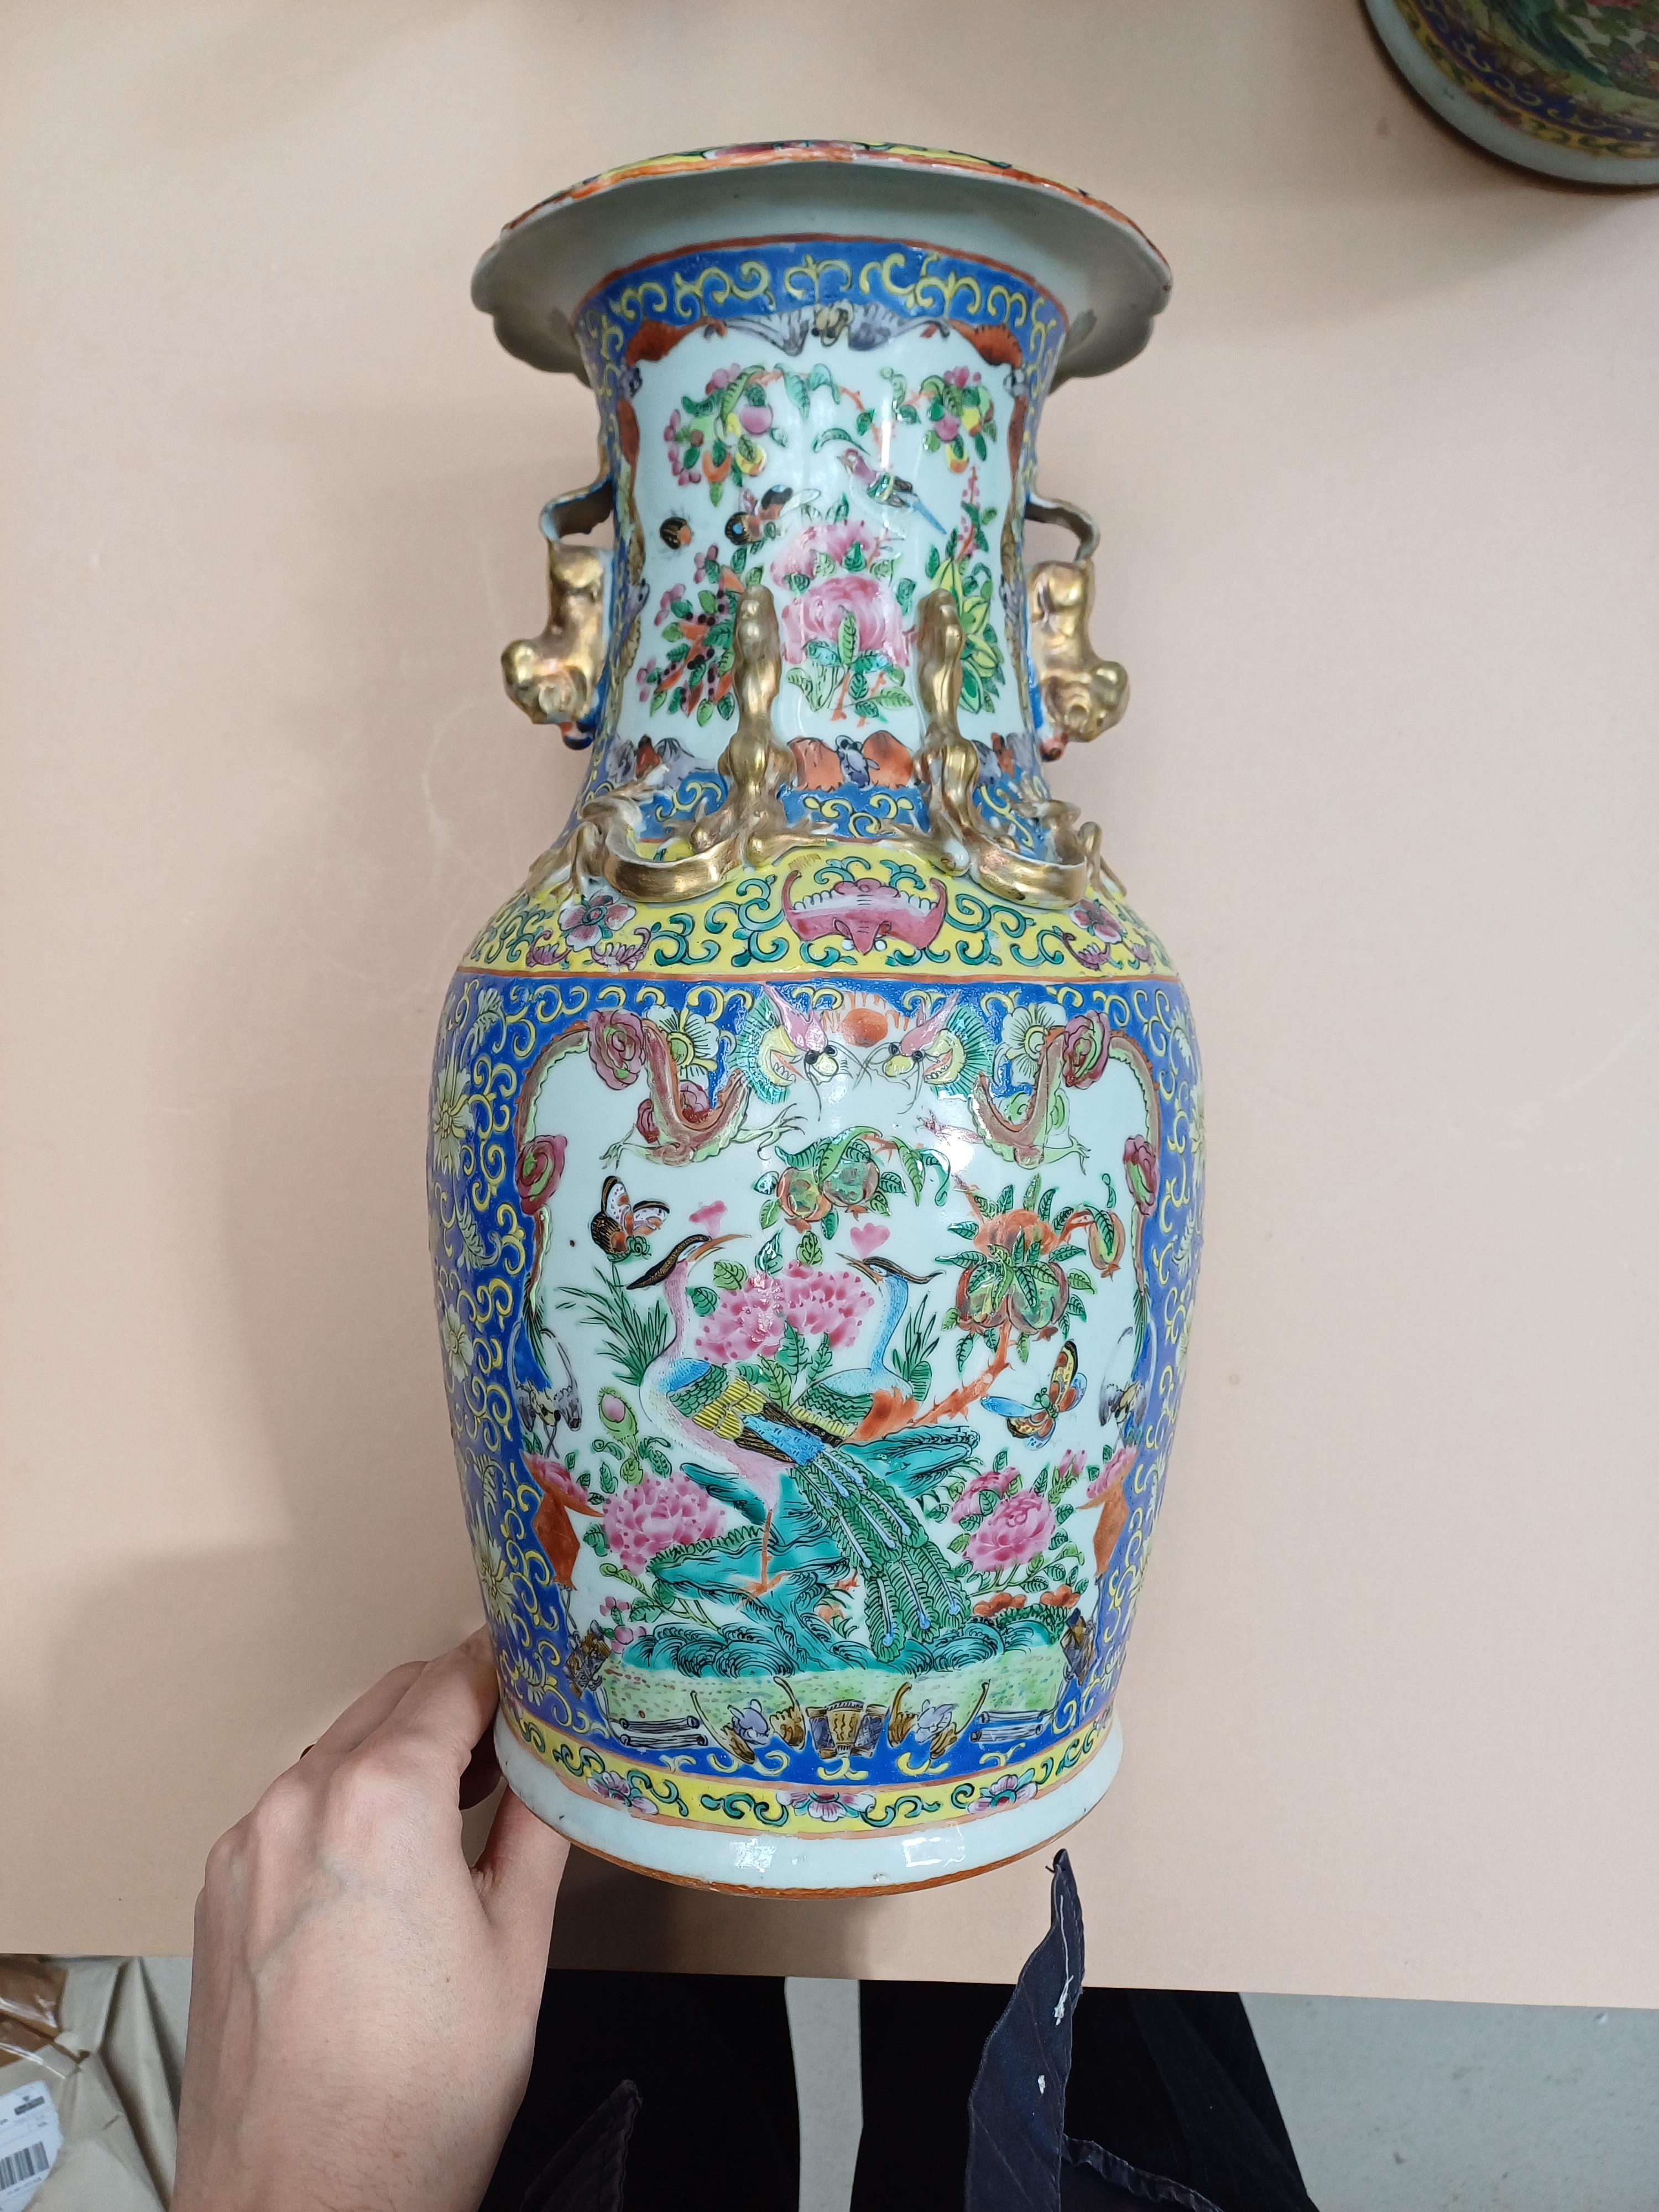 A PAIR OF CHINESE CANTON FAMILLE-ROSE VASES 十九或二十世紀 廣彩花鳥圖紋瓶一對 - Image 10 of 14